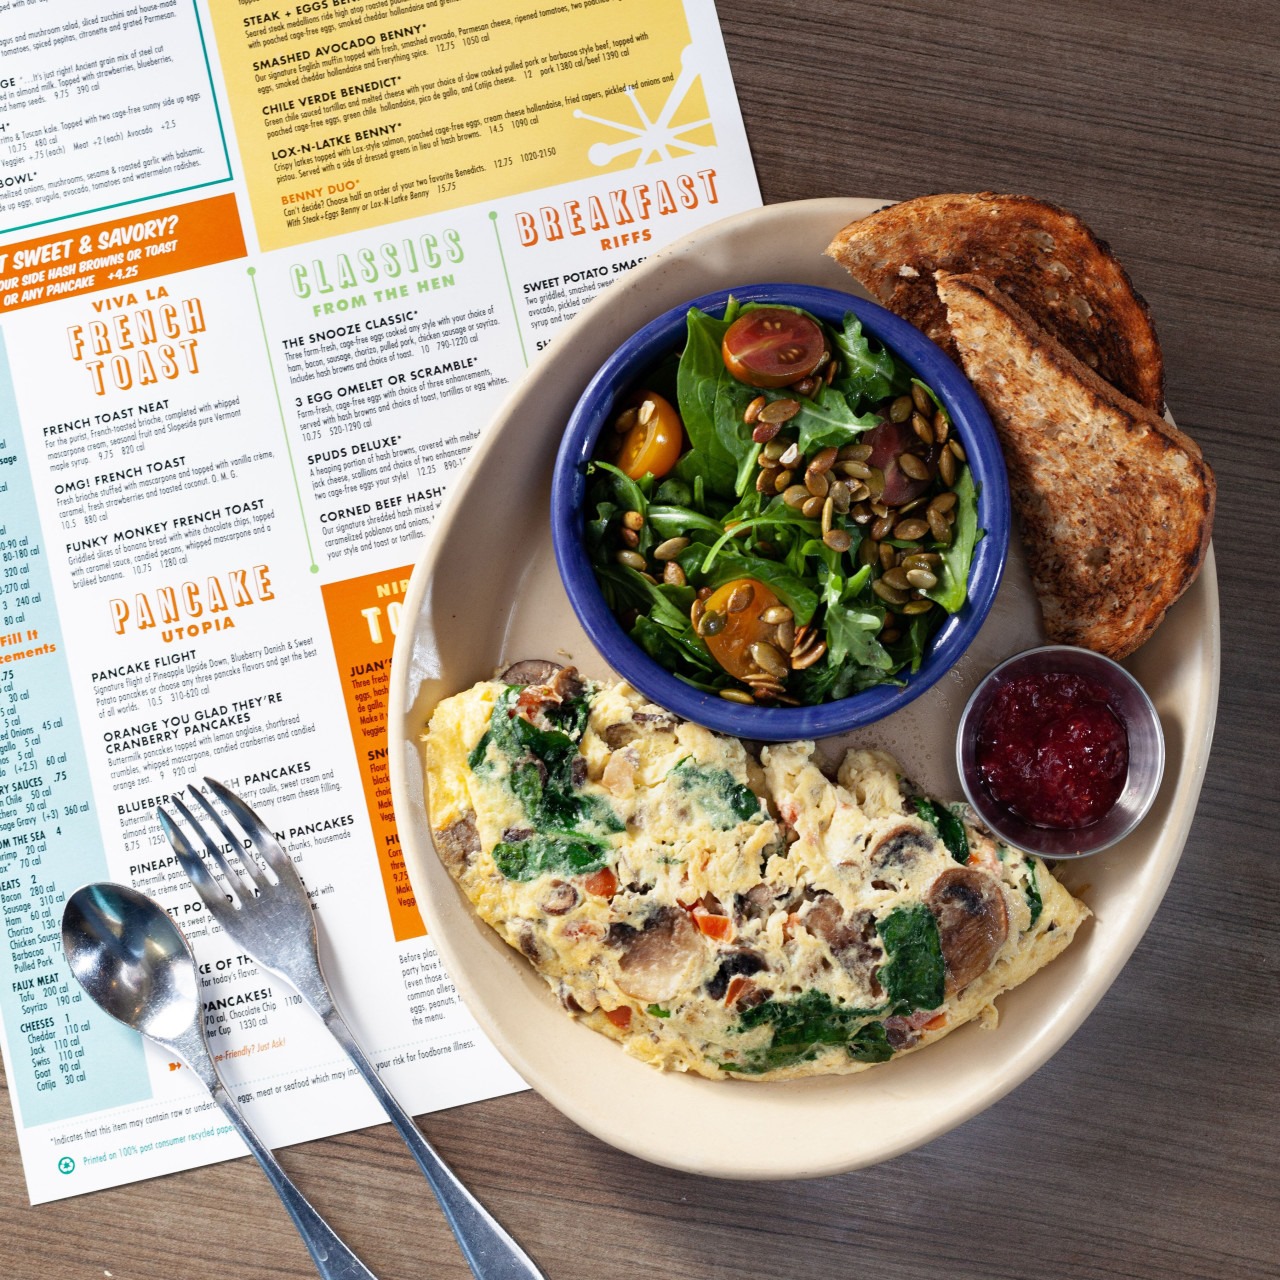 A vegetable omelette with a side salad and wheat toast at Snooze